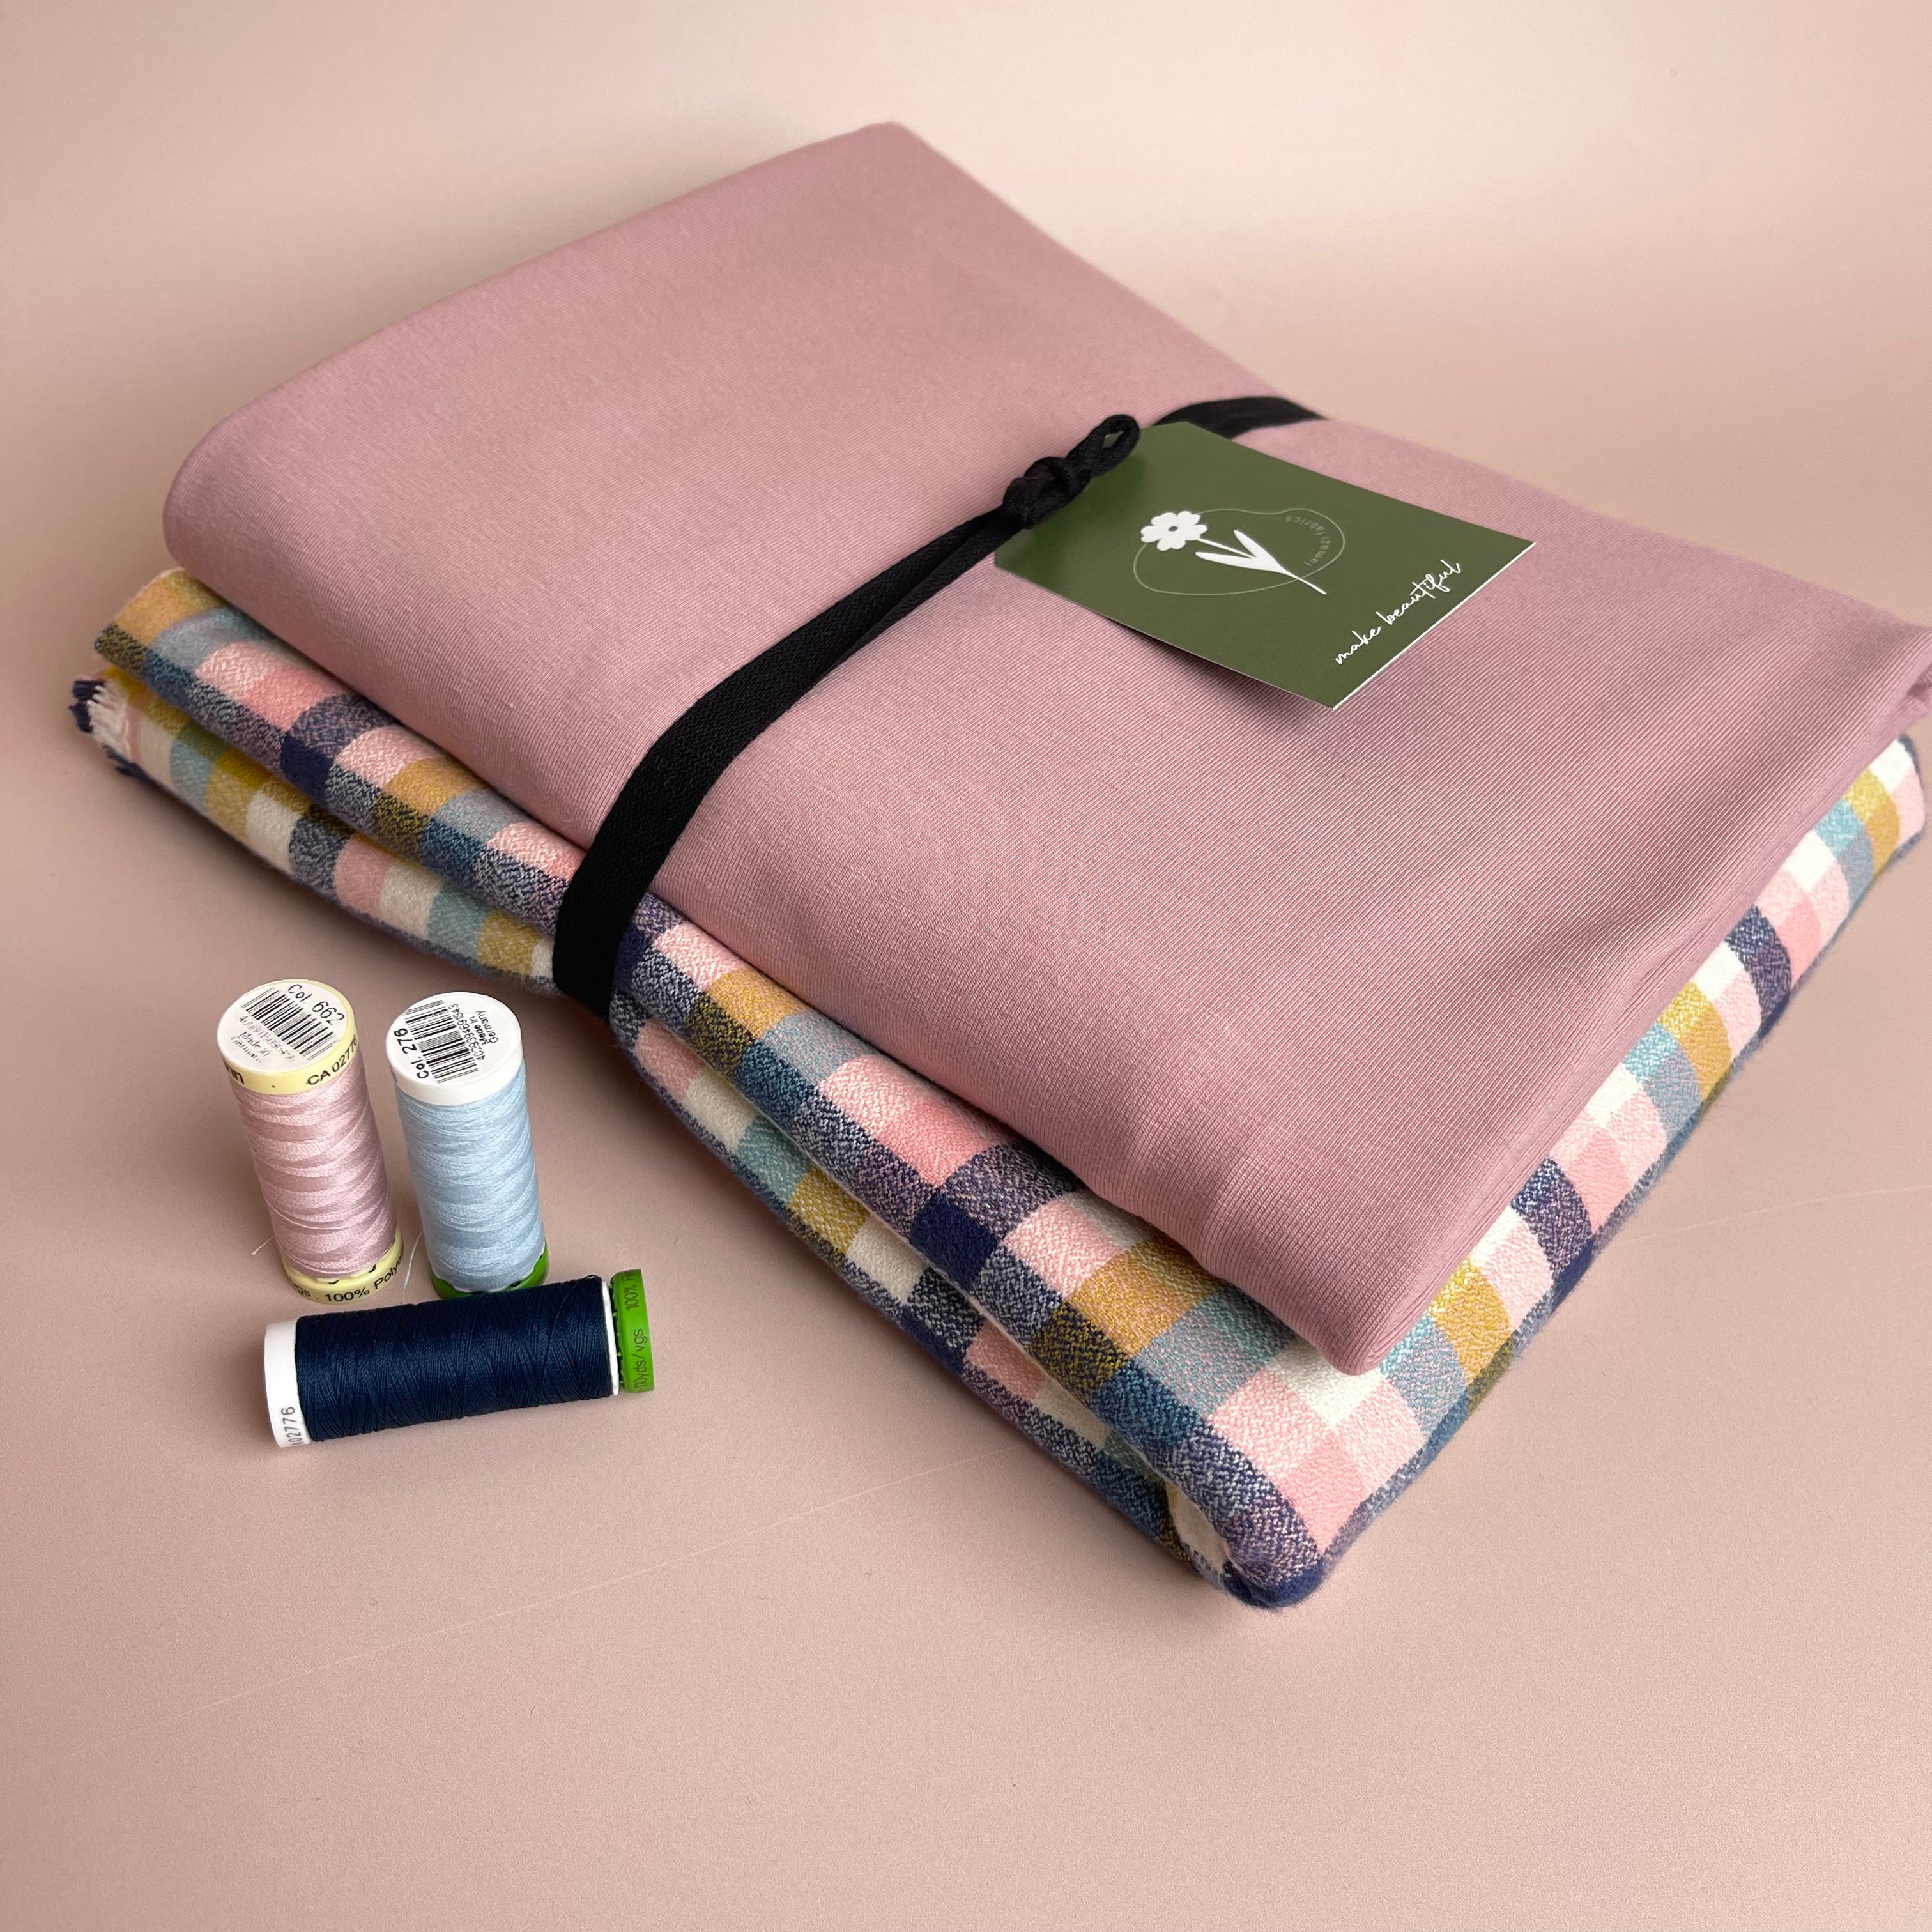 Limited Edition - Luxury Pyjama Kit with Summer Mammoth Flannel